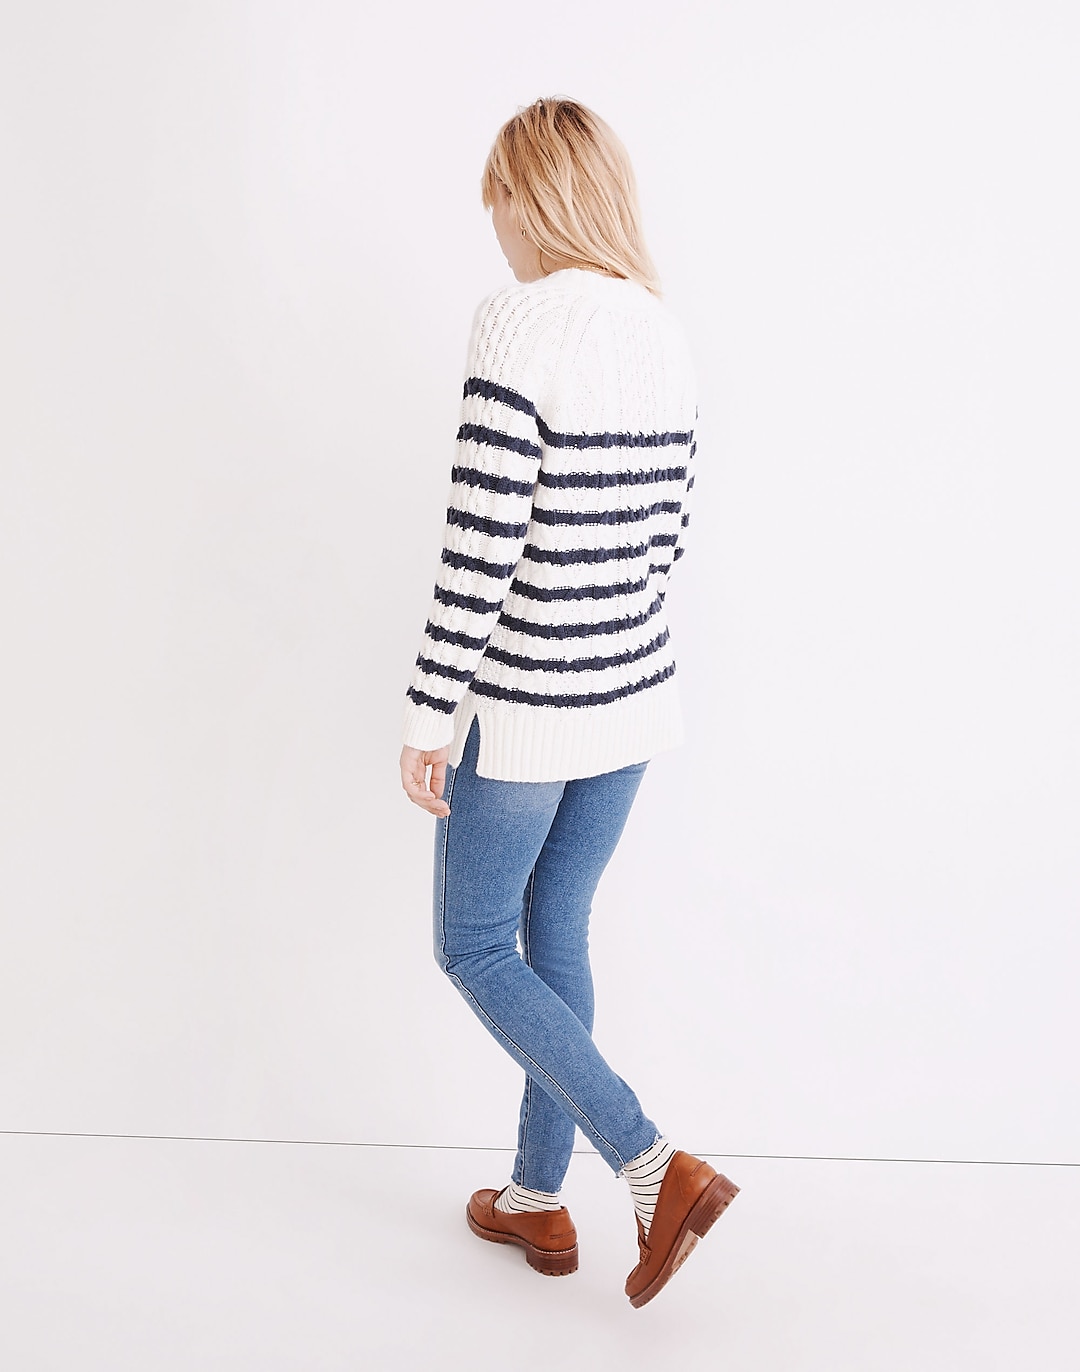 Linelle Cableknit Pullover Sweater in Stripe